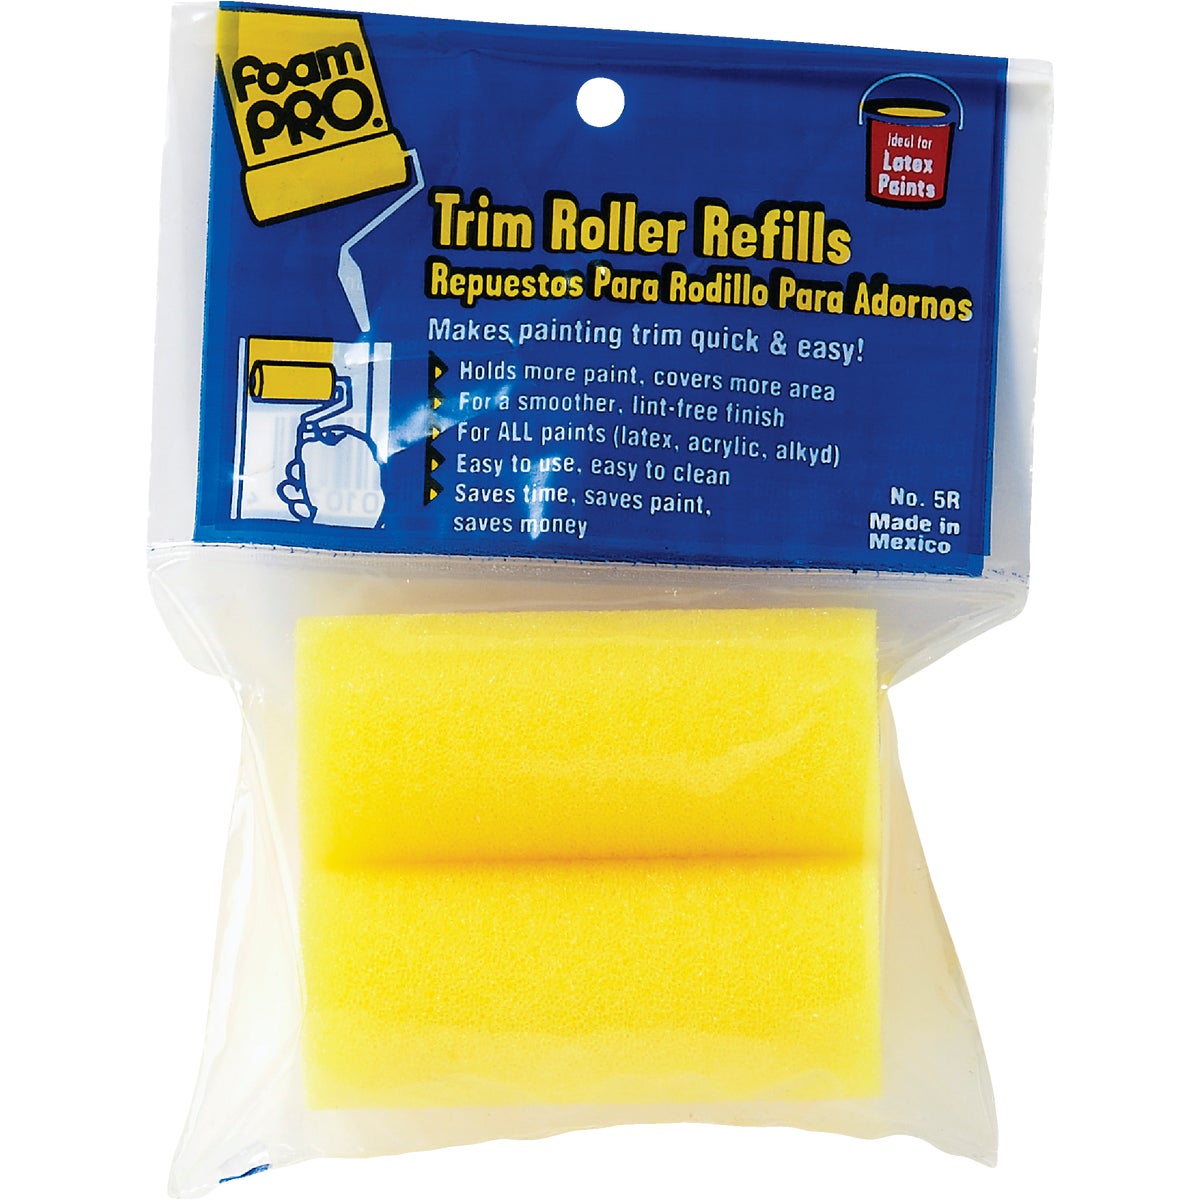 Item 771903, Trim roller cover is perfect for small projects and touch-ups.